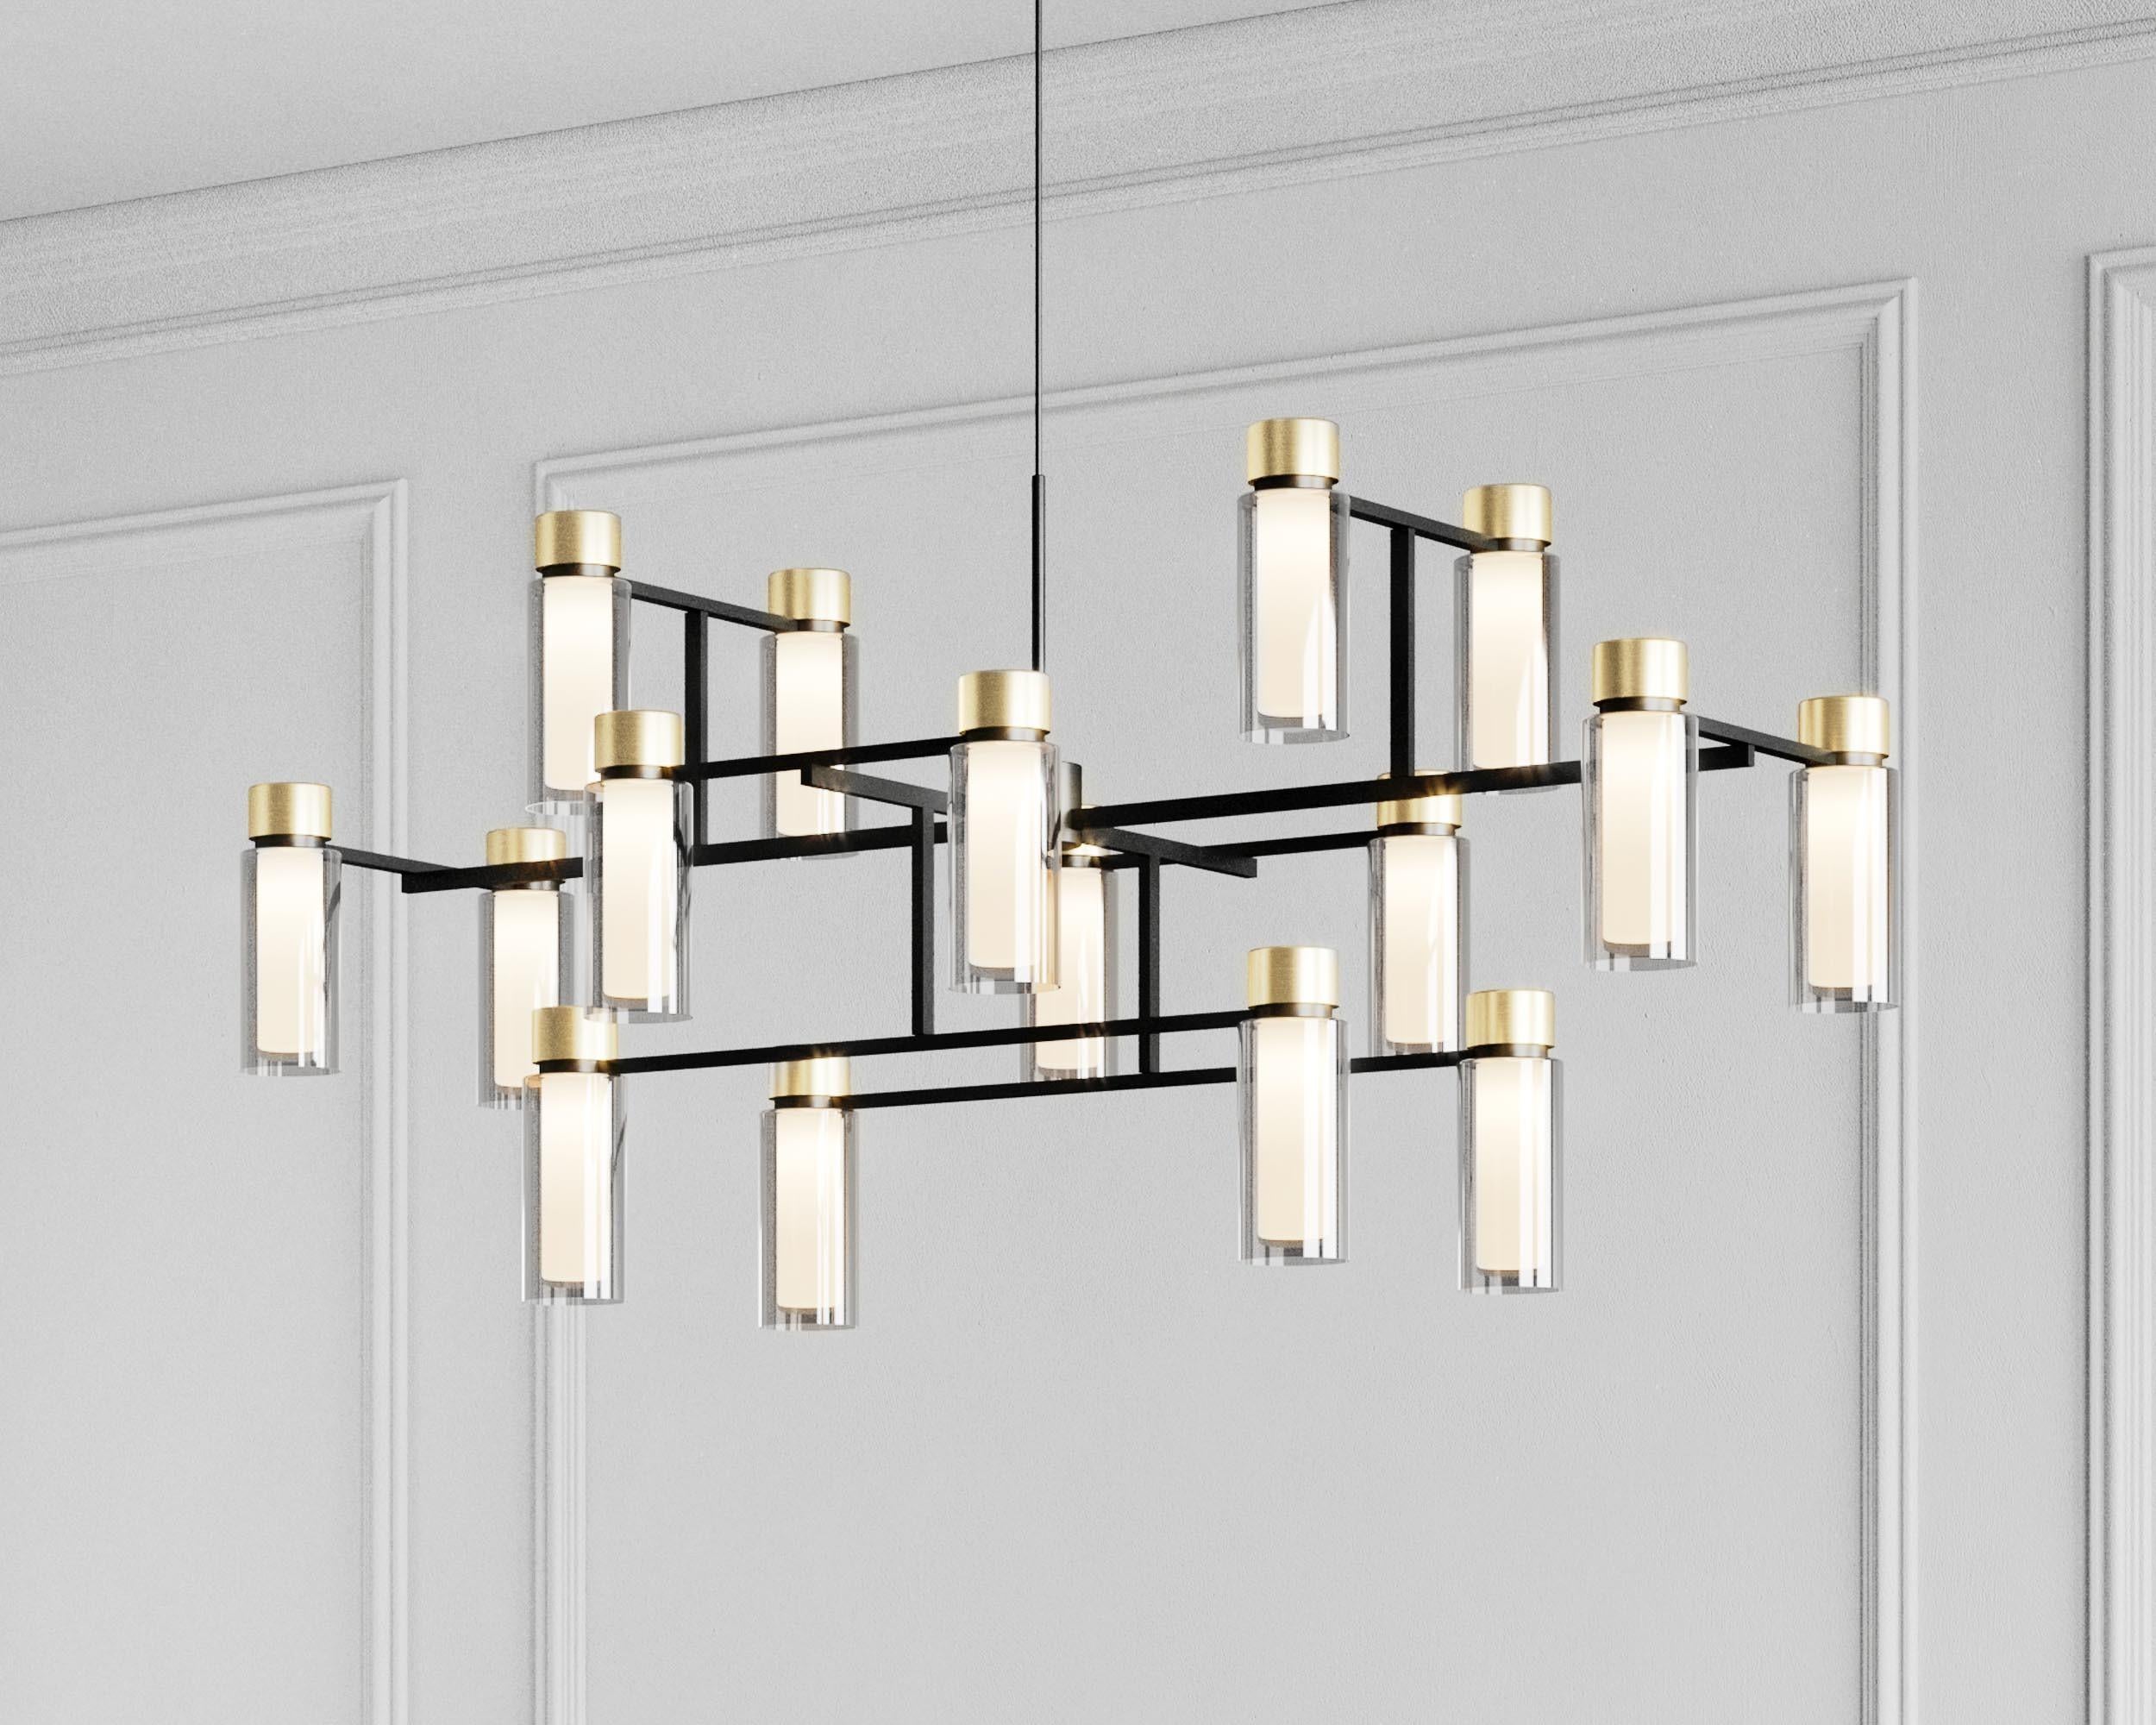 Chandelier Osman 560.16 by Corrado Dotti x TOOY.
16 Lights

Model shown:
Finish: Brushed brass
Color: Smoke glass

Lighting source : 16 x E14 220/240V Compliant with US electric system

Pendant: Cable length 60 / 90 cm. 

50s Inspired collection of